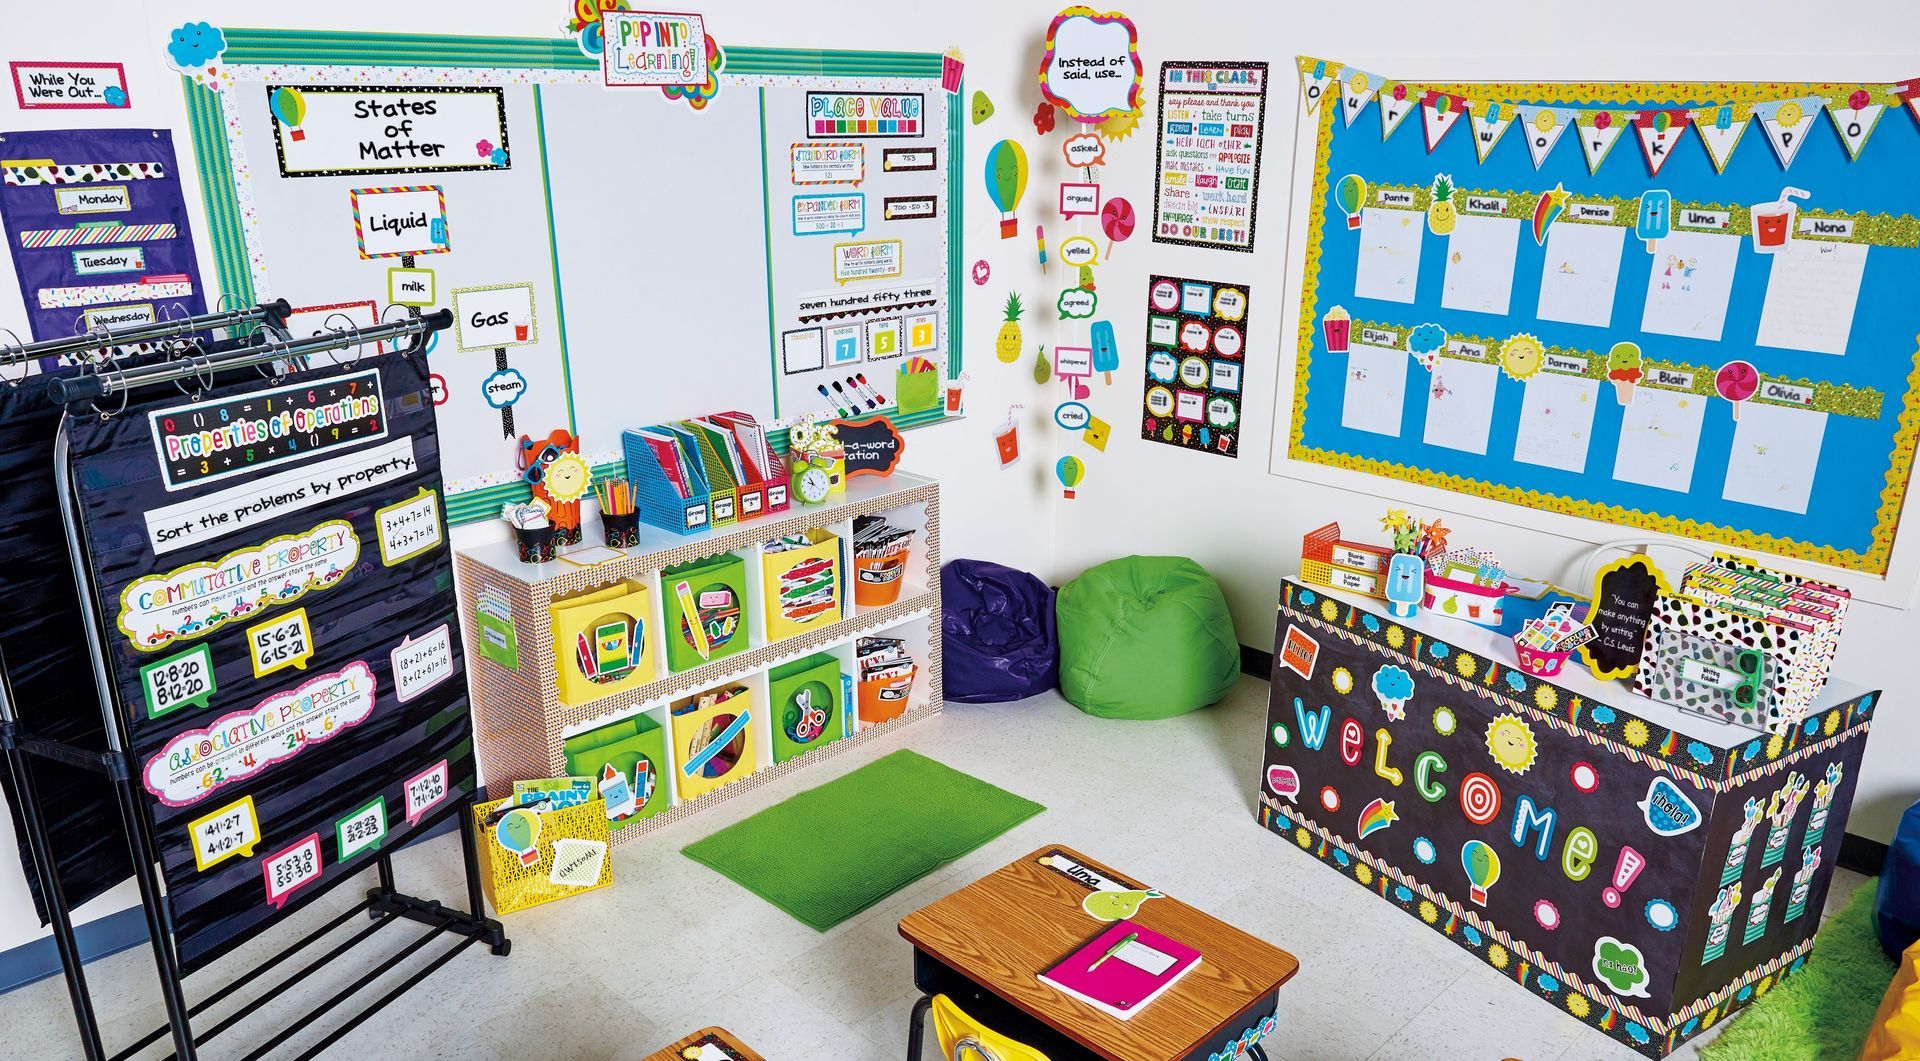 Educators and staff get exclusive discounts at Carson Dellosa Education. Save on classroom decorations, teaching supplies, and more.